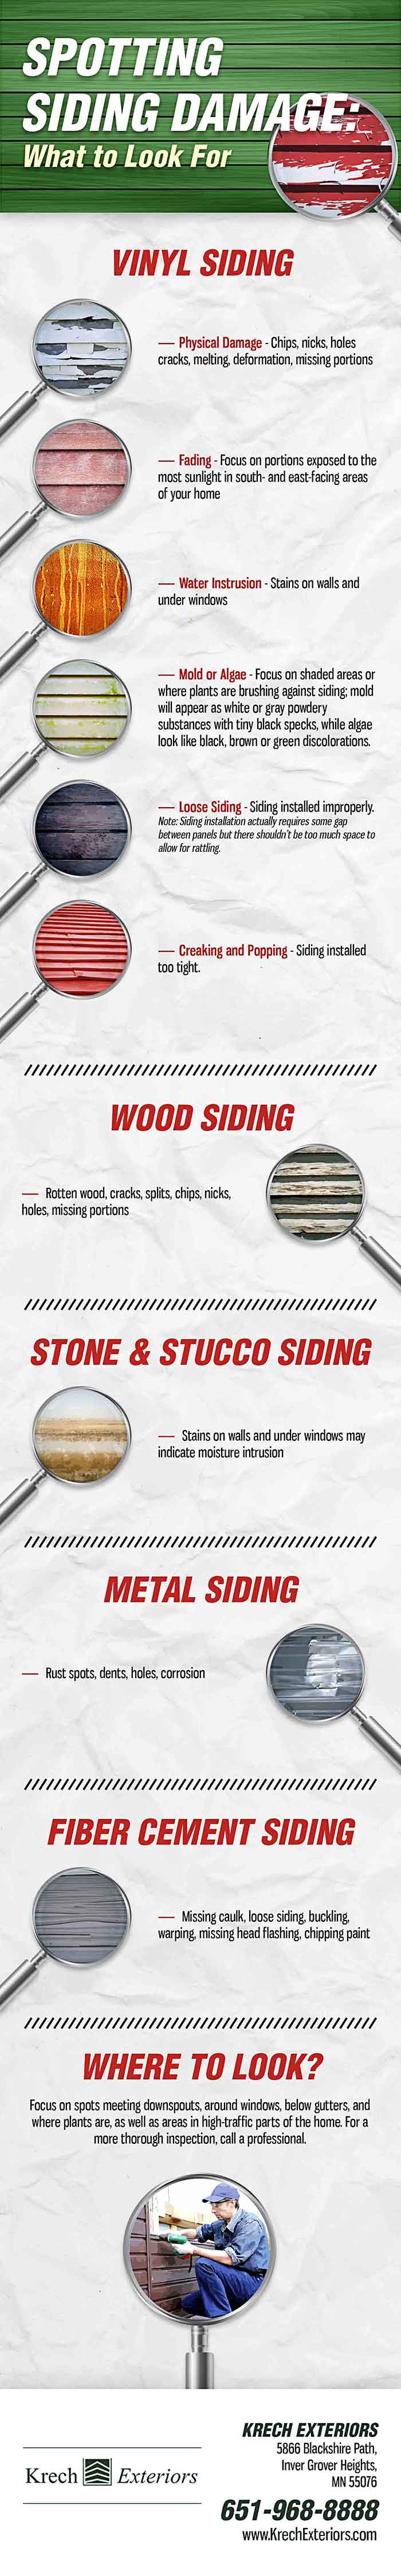 Infographic - Spotting Siding Damage What to Look for